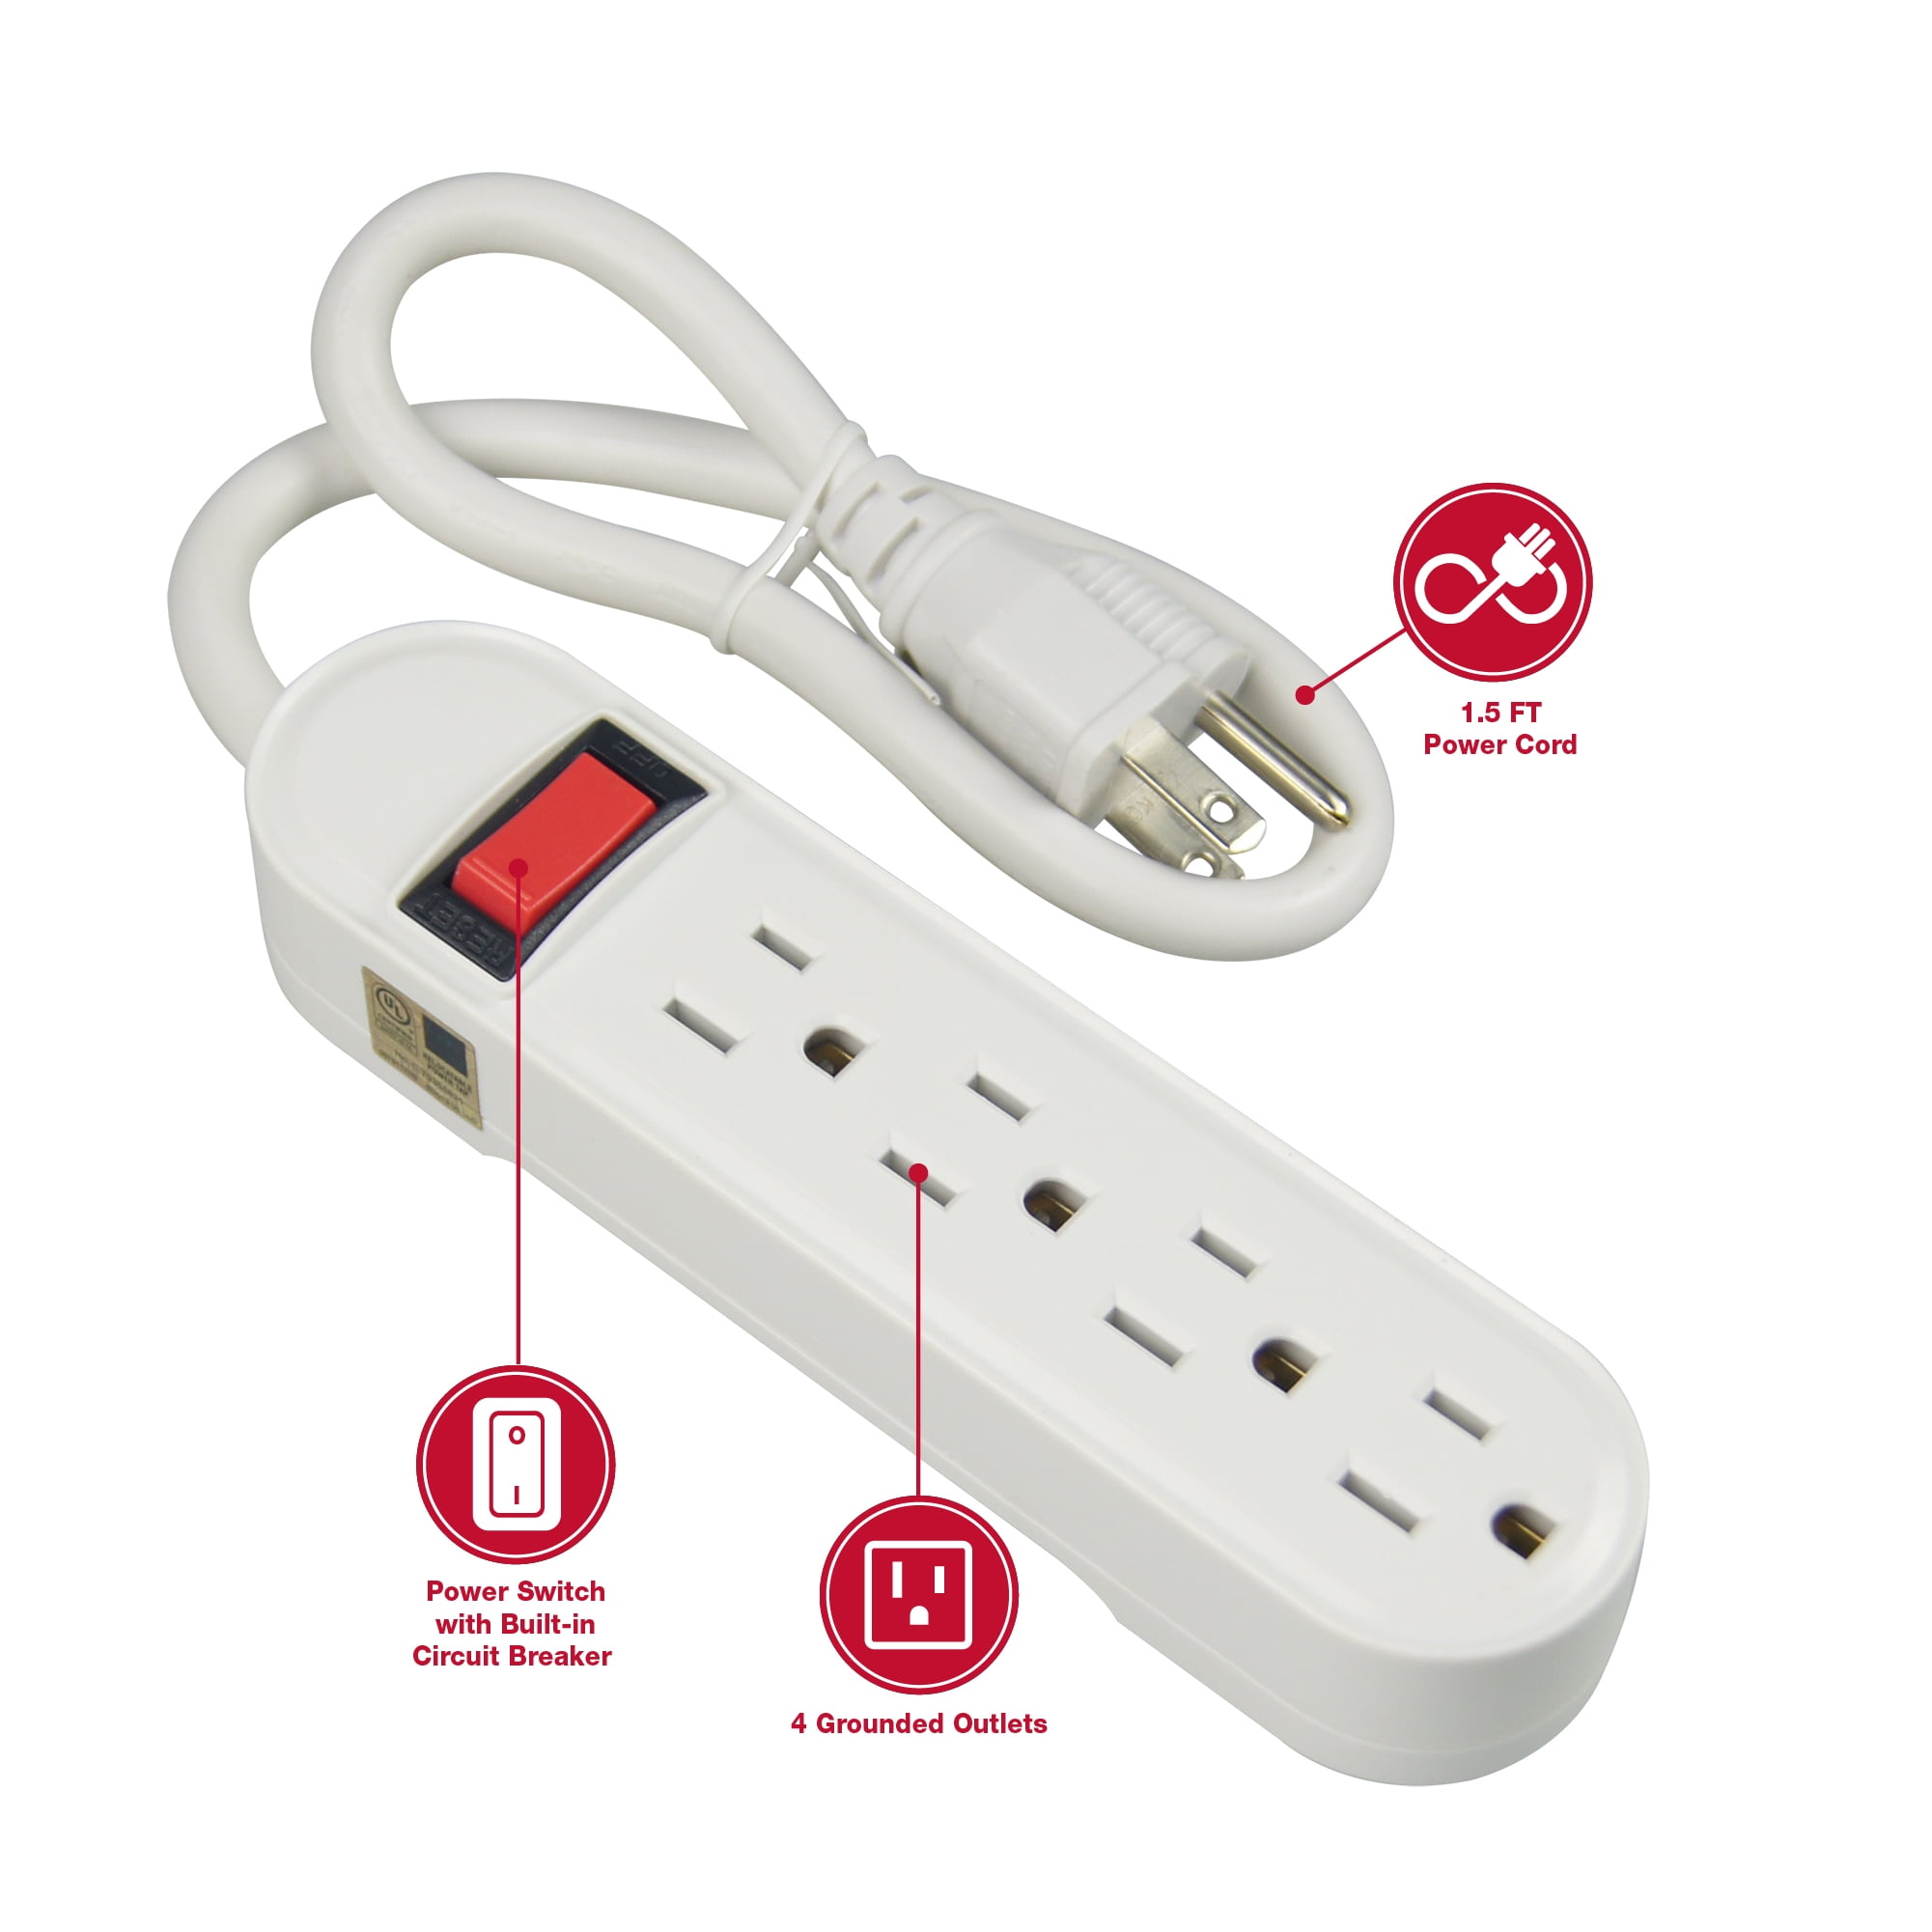 2 Pack No Surge Protector Fosmon 3 Outlet Power Strip Ship Approved 3 Prong Grounded Plug UL Listed 3ft Outlet Extender for Cruise Ship Travel Home 3-Foot Short Extension Cord Wall Mount